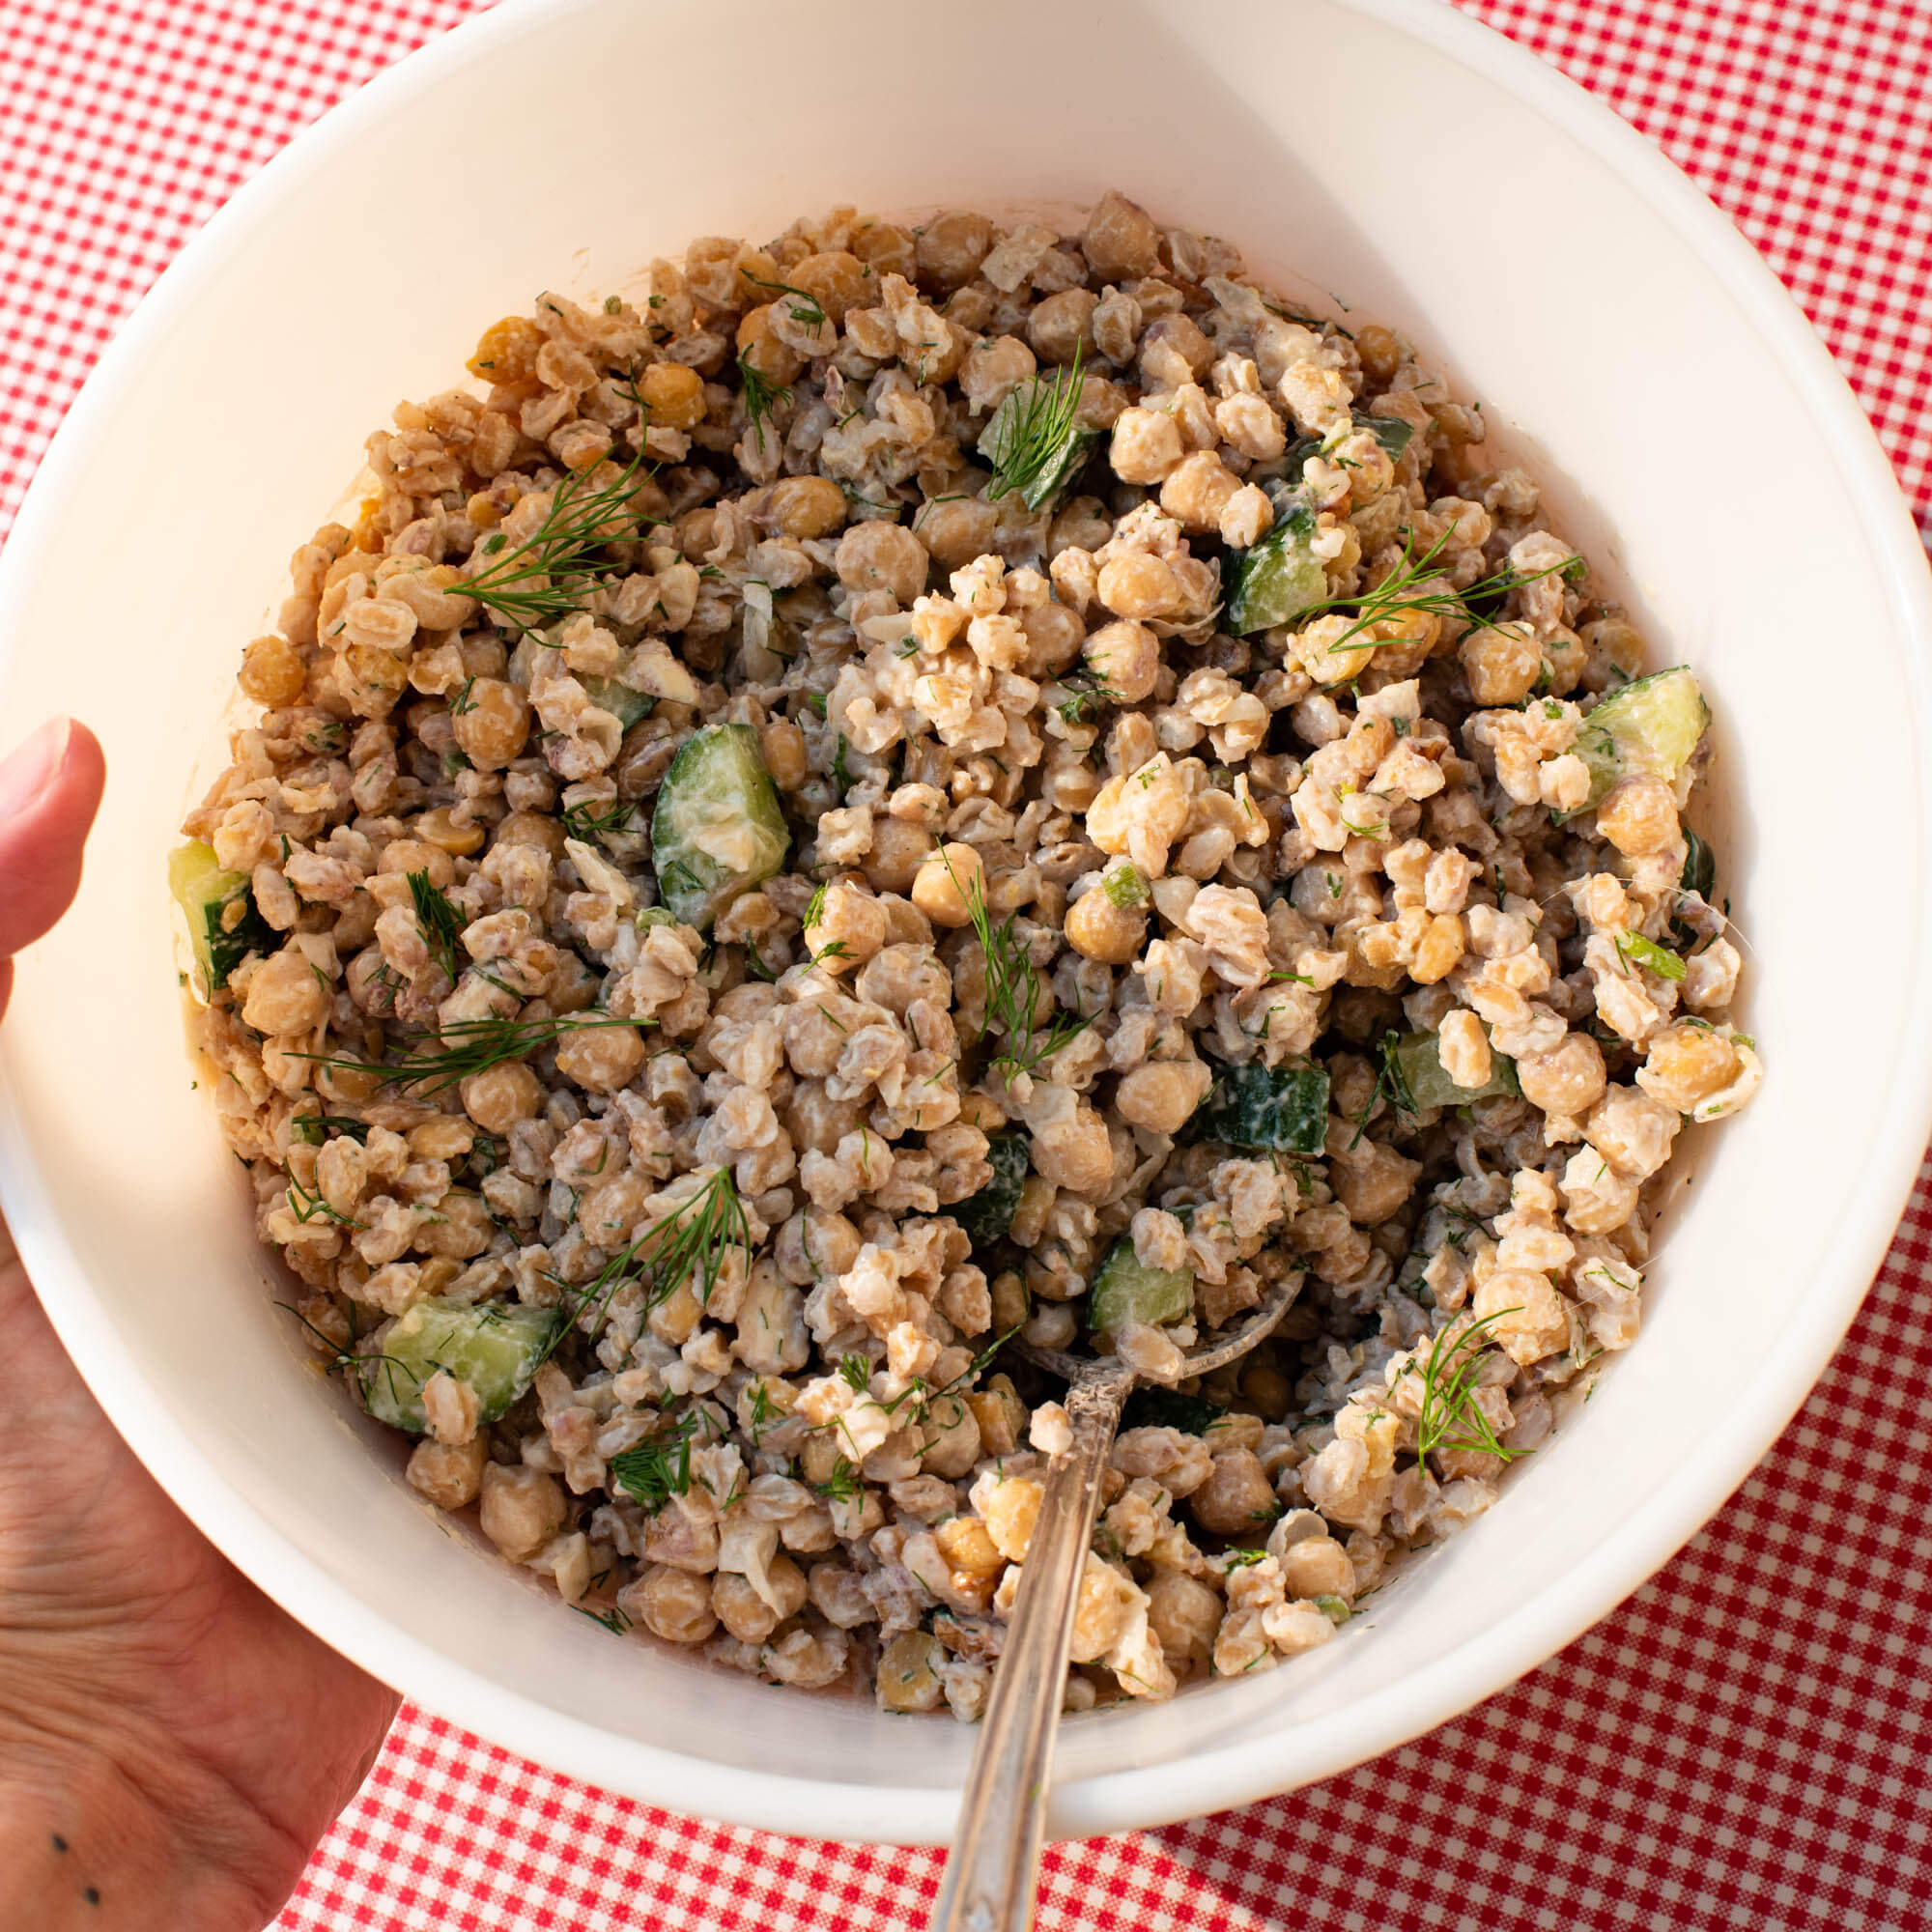 Farro and chickpeas with dill-yogurt dressing with Primary Beans Chickpeas